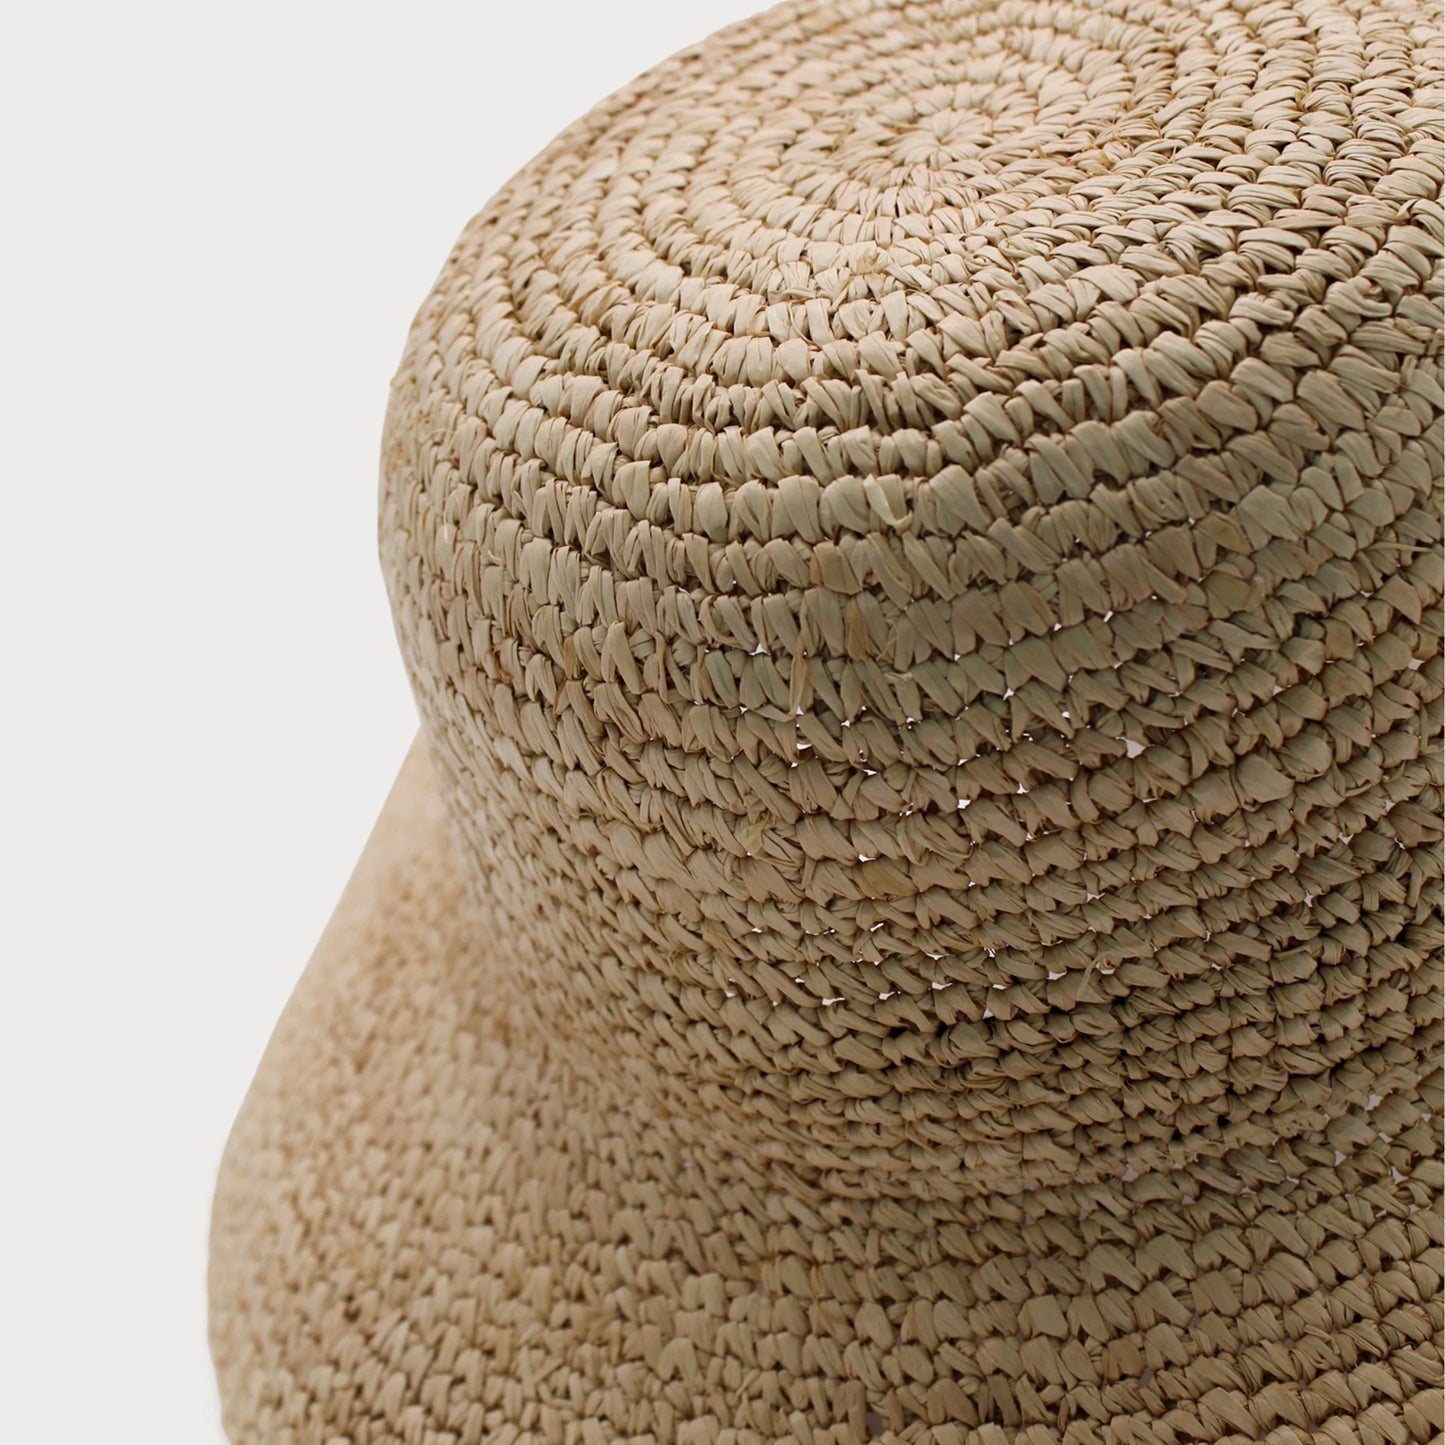 Ace of Something Oodnadatta Bucket Hat | Natural